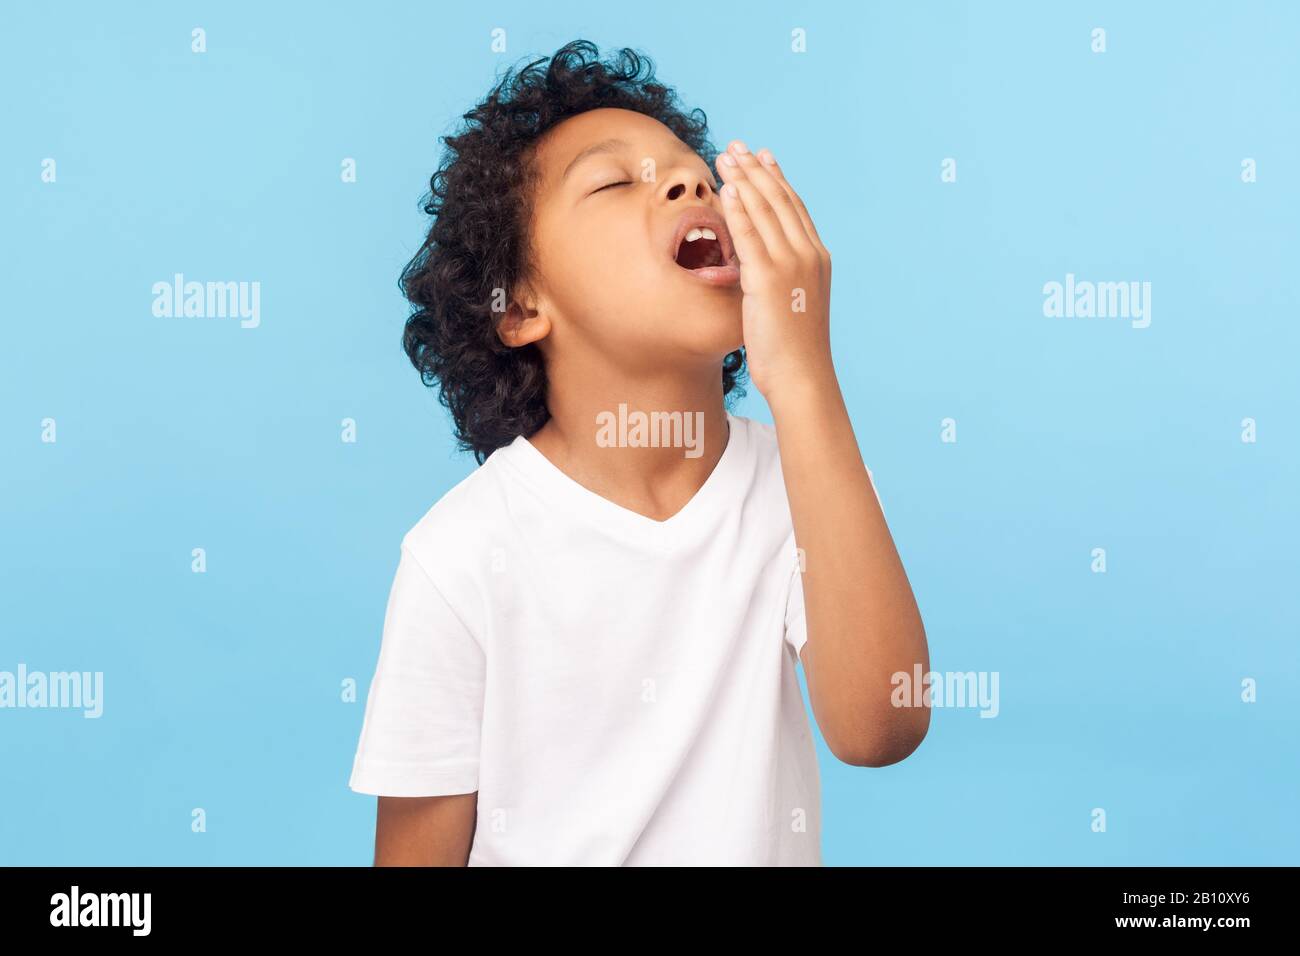 Portrait of sleepy tired little boy with curly hair in white T-shirt covering mouth with hand while yawning with eyes closed, drowsy child waking up. Stock Photo